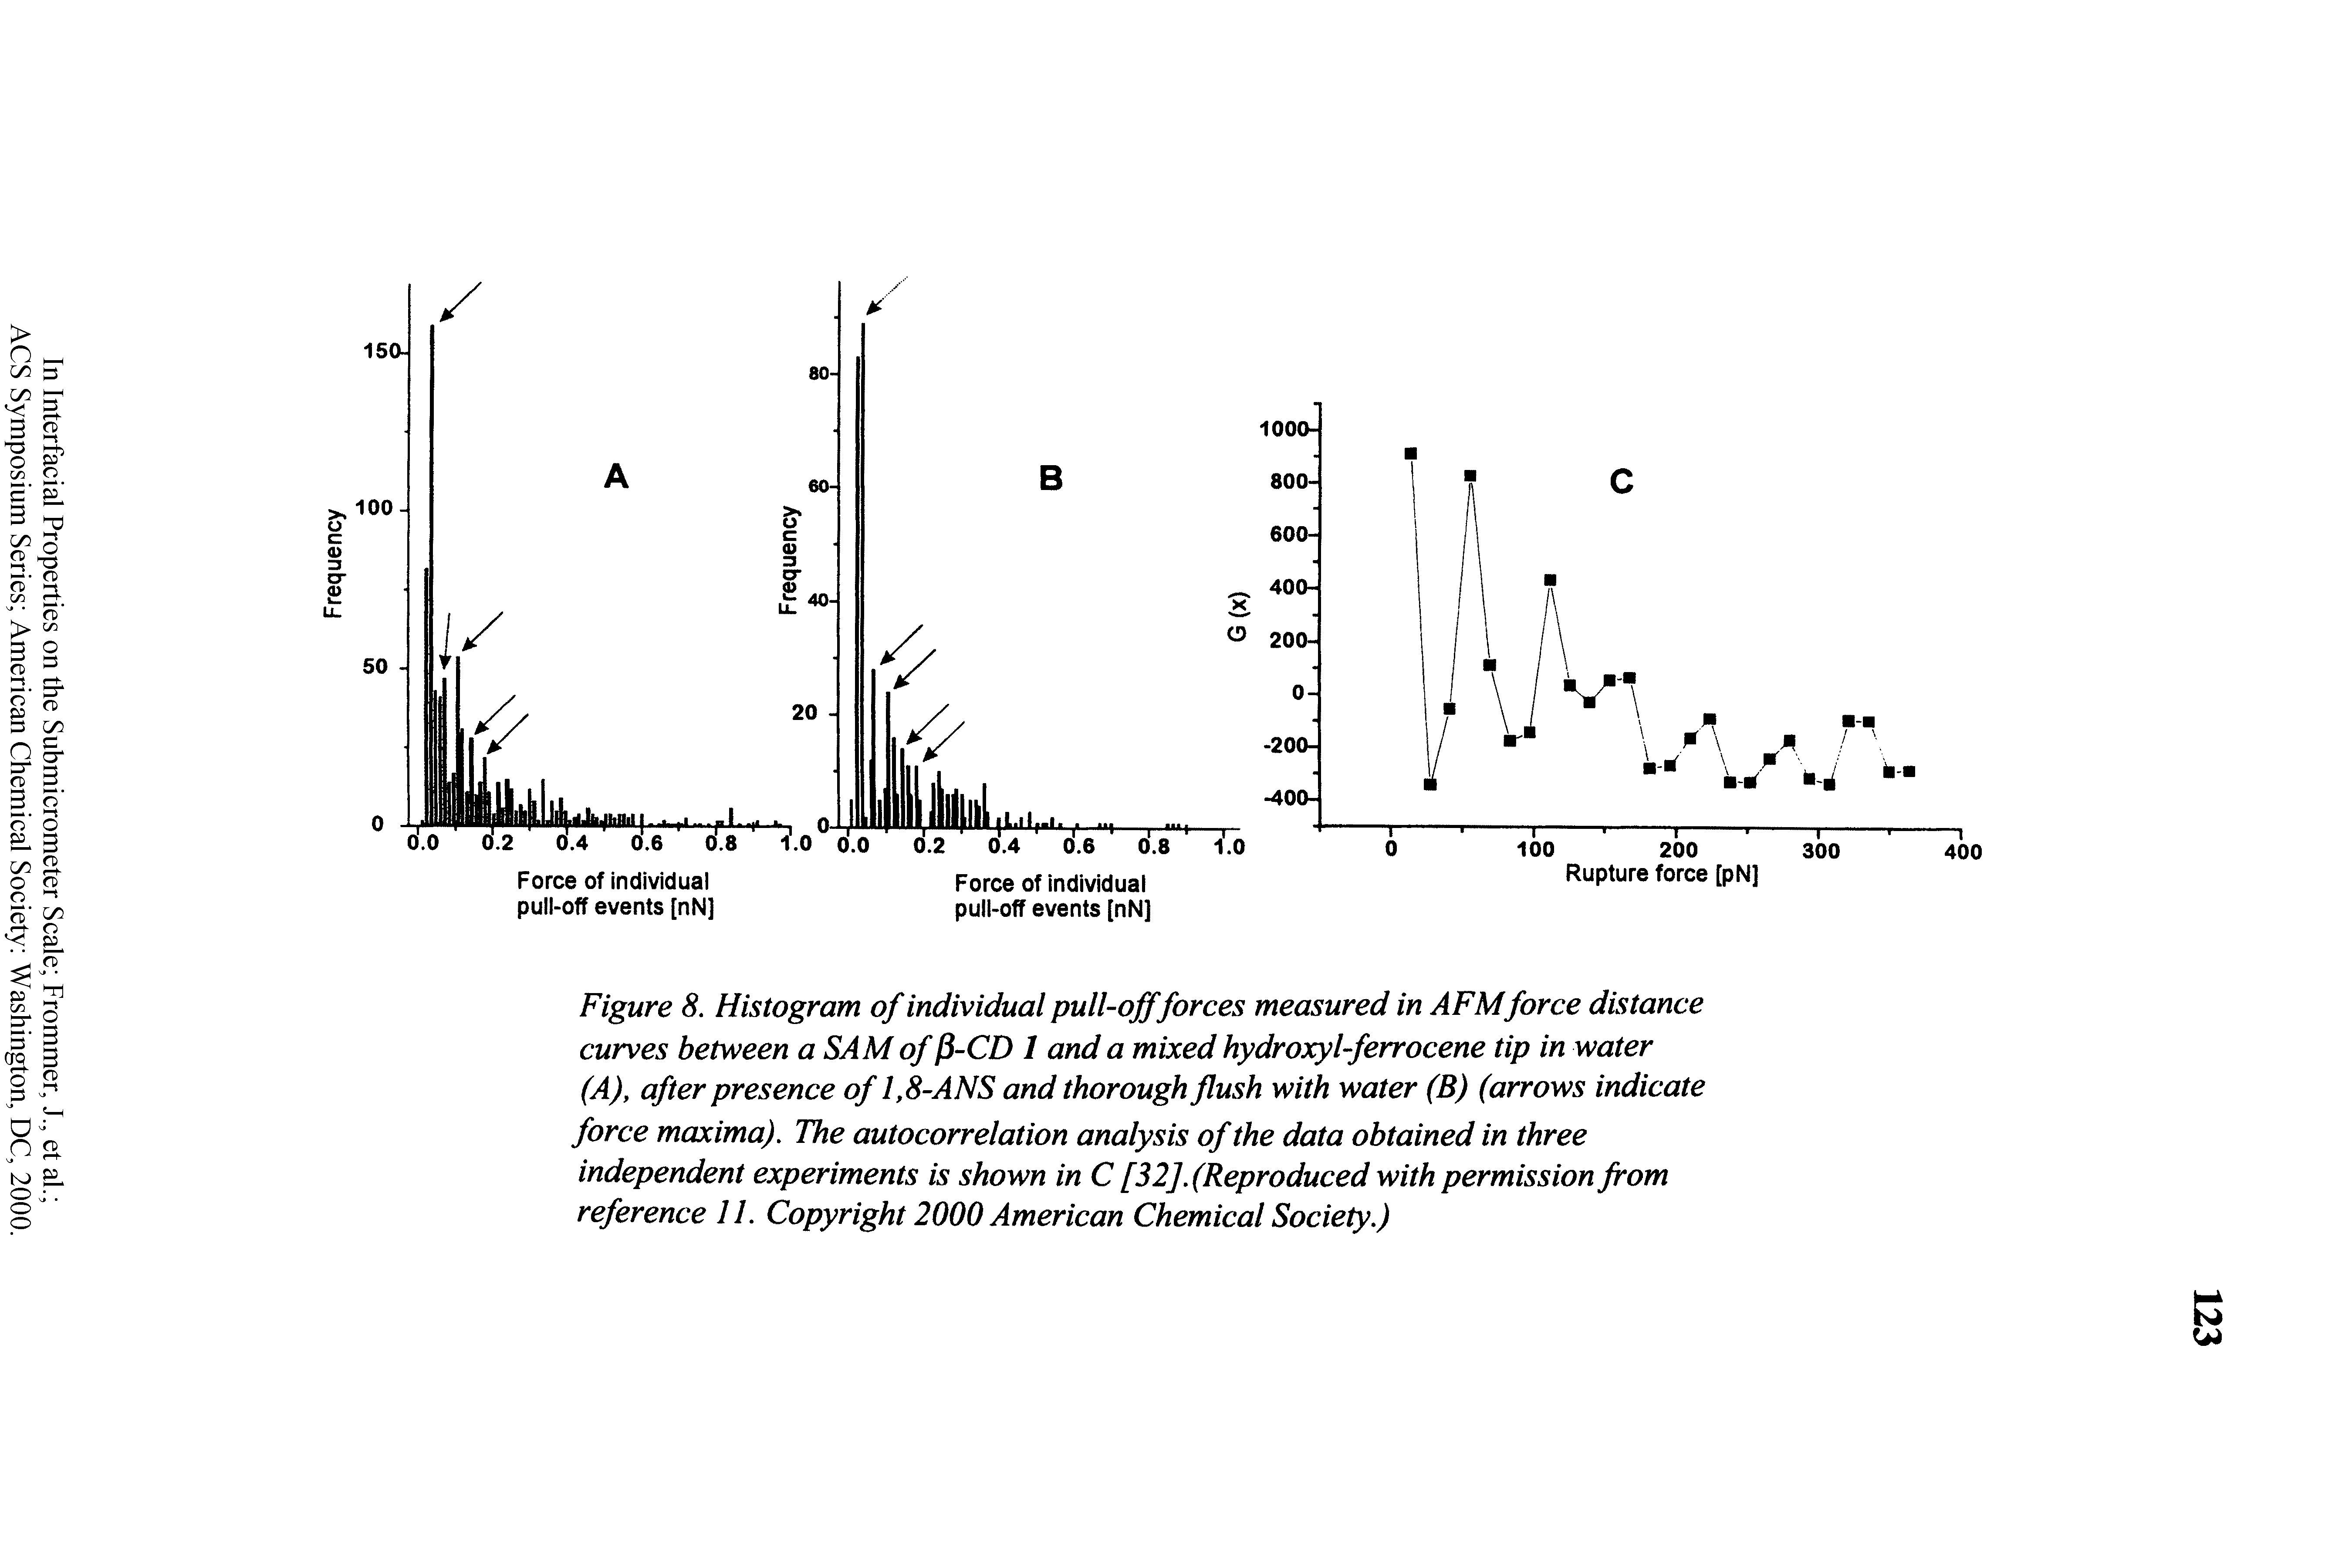 Figure 8. Histogram of individual pull-offforces measured in AFMforce distance curves between a SAM of p-CD 1 and a mixed hydroxyl-ferrocene tip in water (A), after presence of 1,8-ANS and thorough flush with water (B) (arrows indicate force maxima). The autocorrelation analysis of the data obtained in three independent experiments is shown in C [32]. (Reproduced with permission from reference 11. Copyright 2000 American Chemical Society.)...